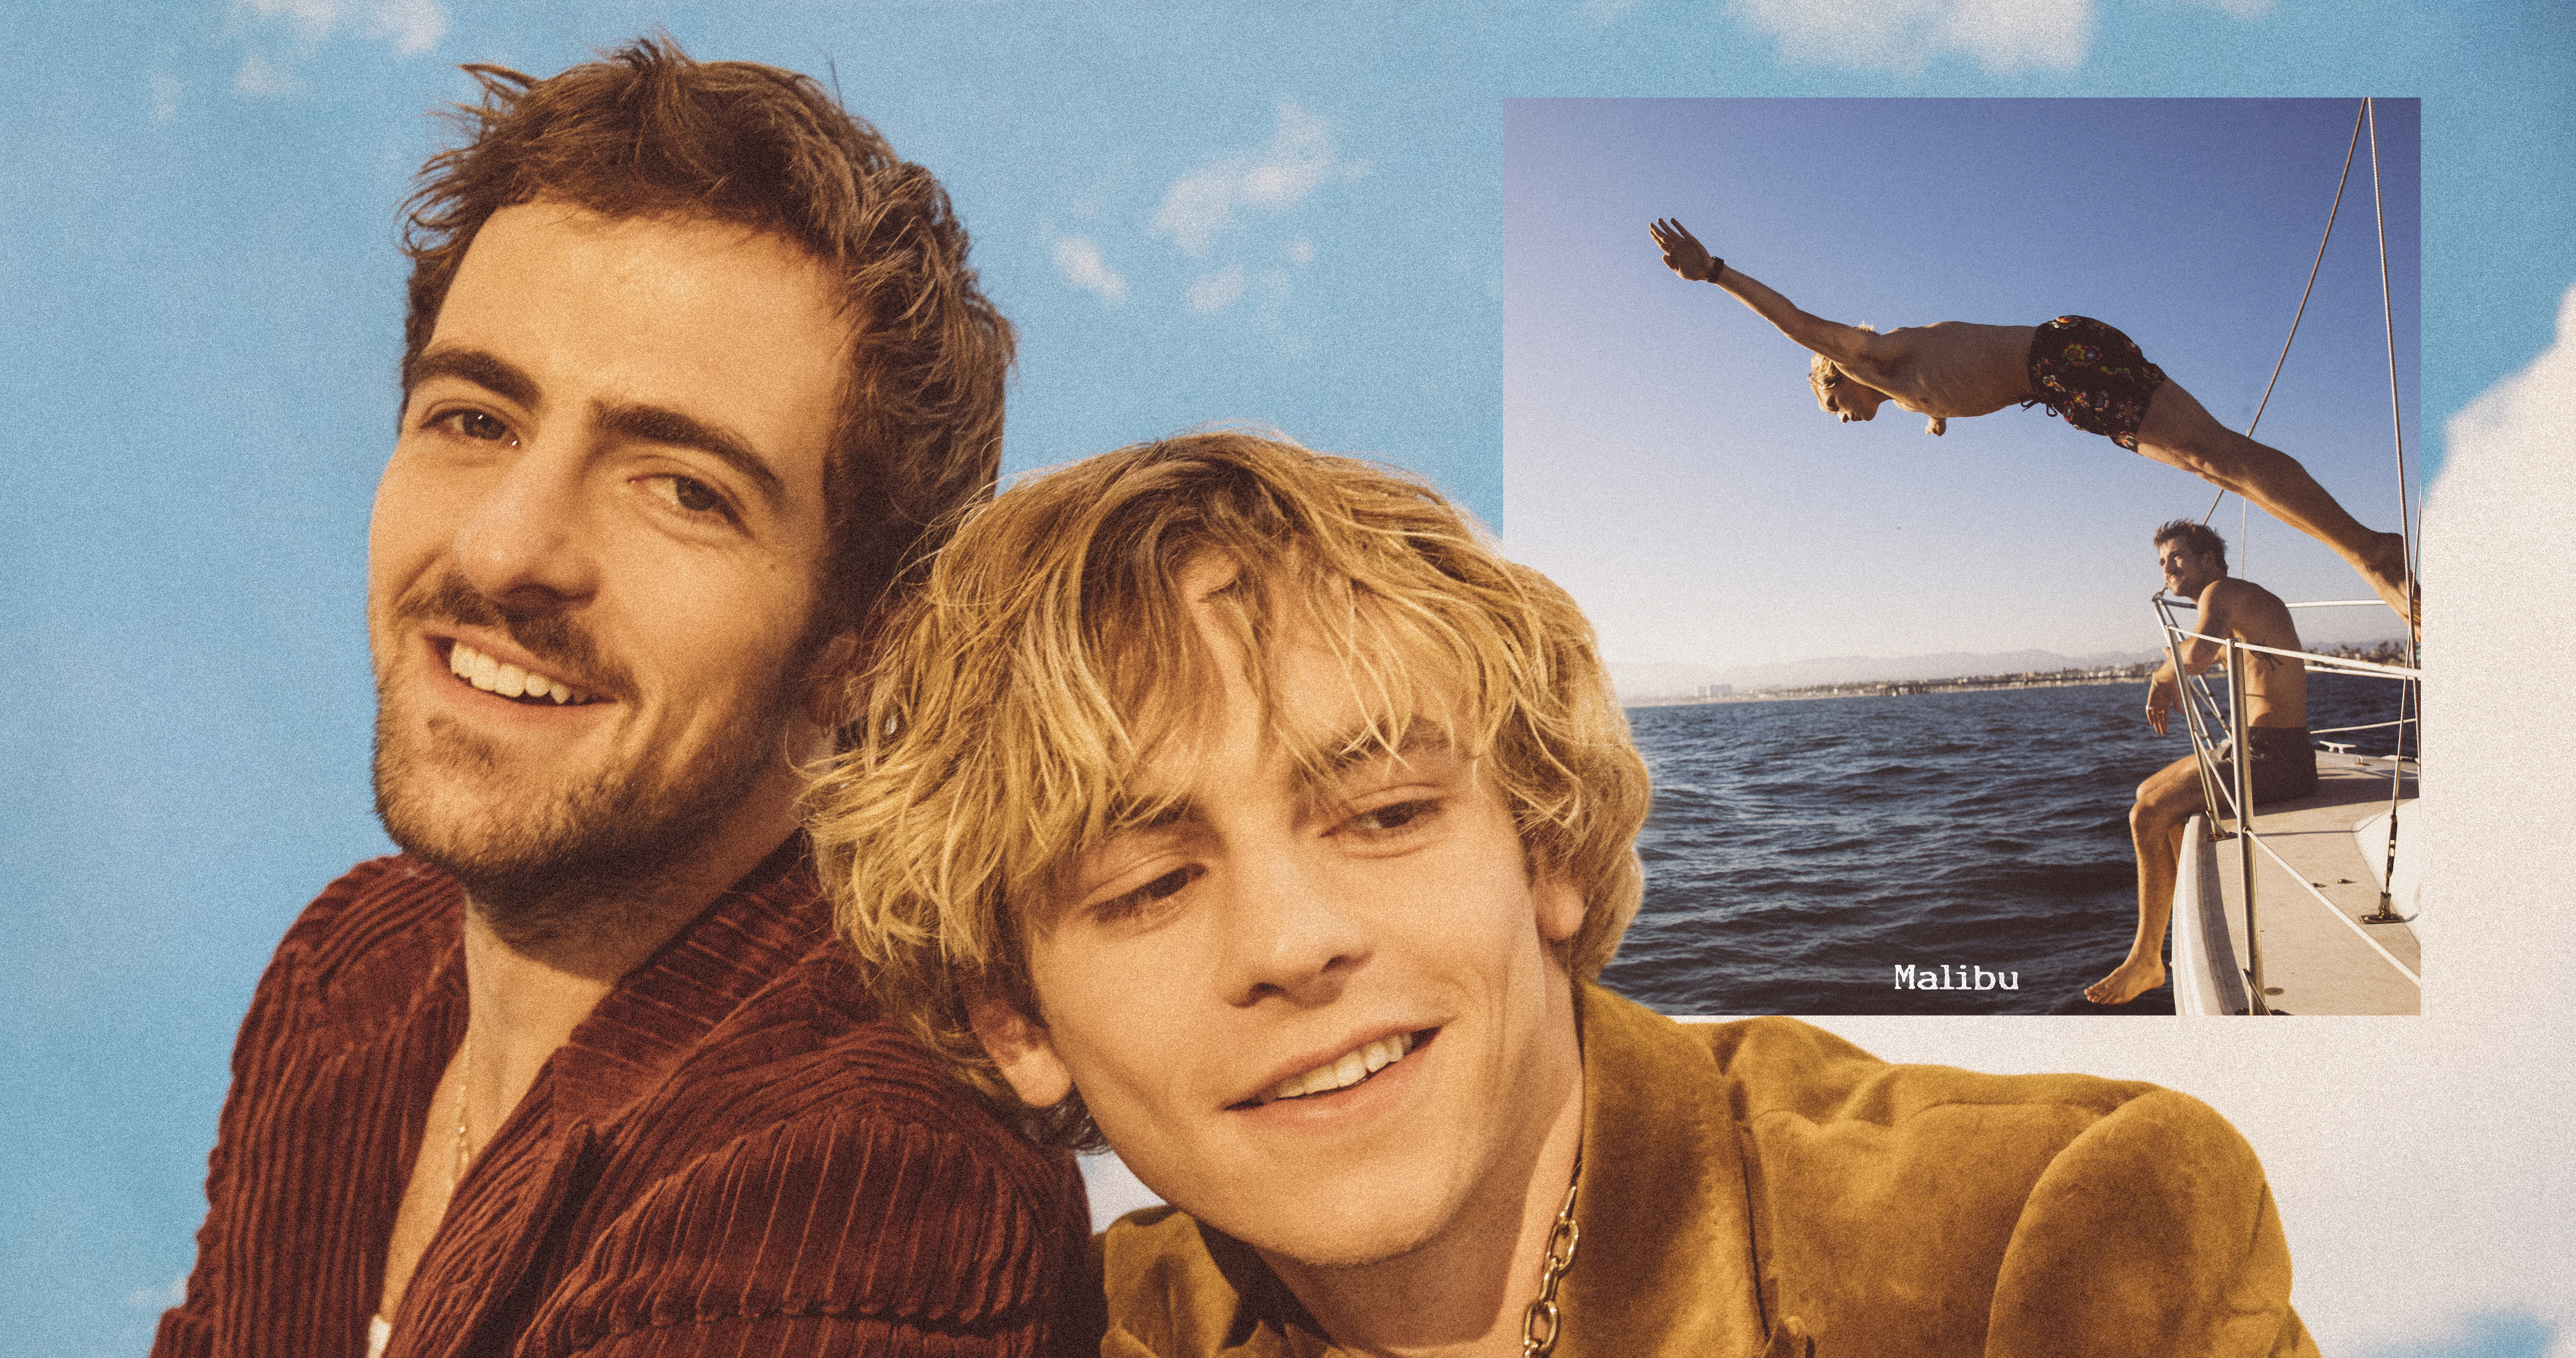 THE DRIVER ERA return with Malibu: First listen to Rocky and Ross Lynch's breezy summer single